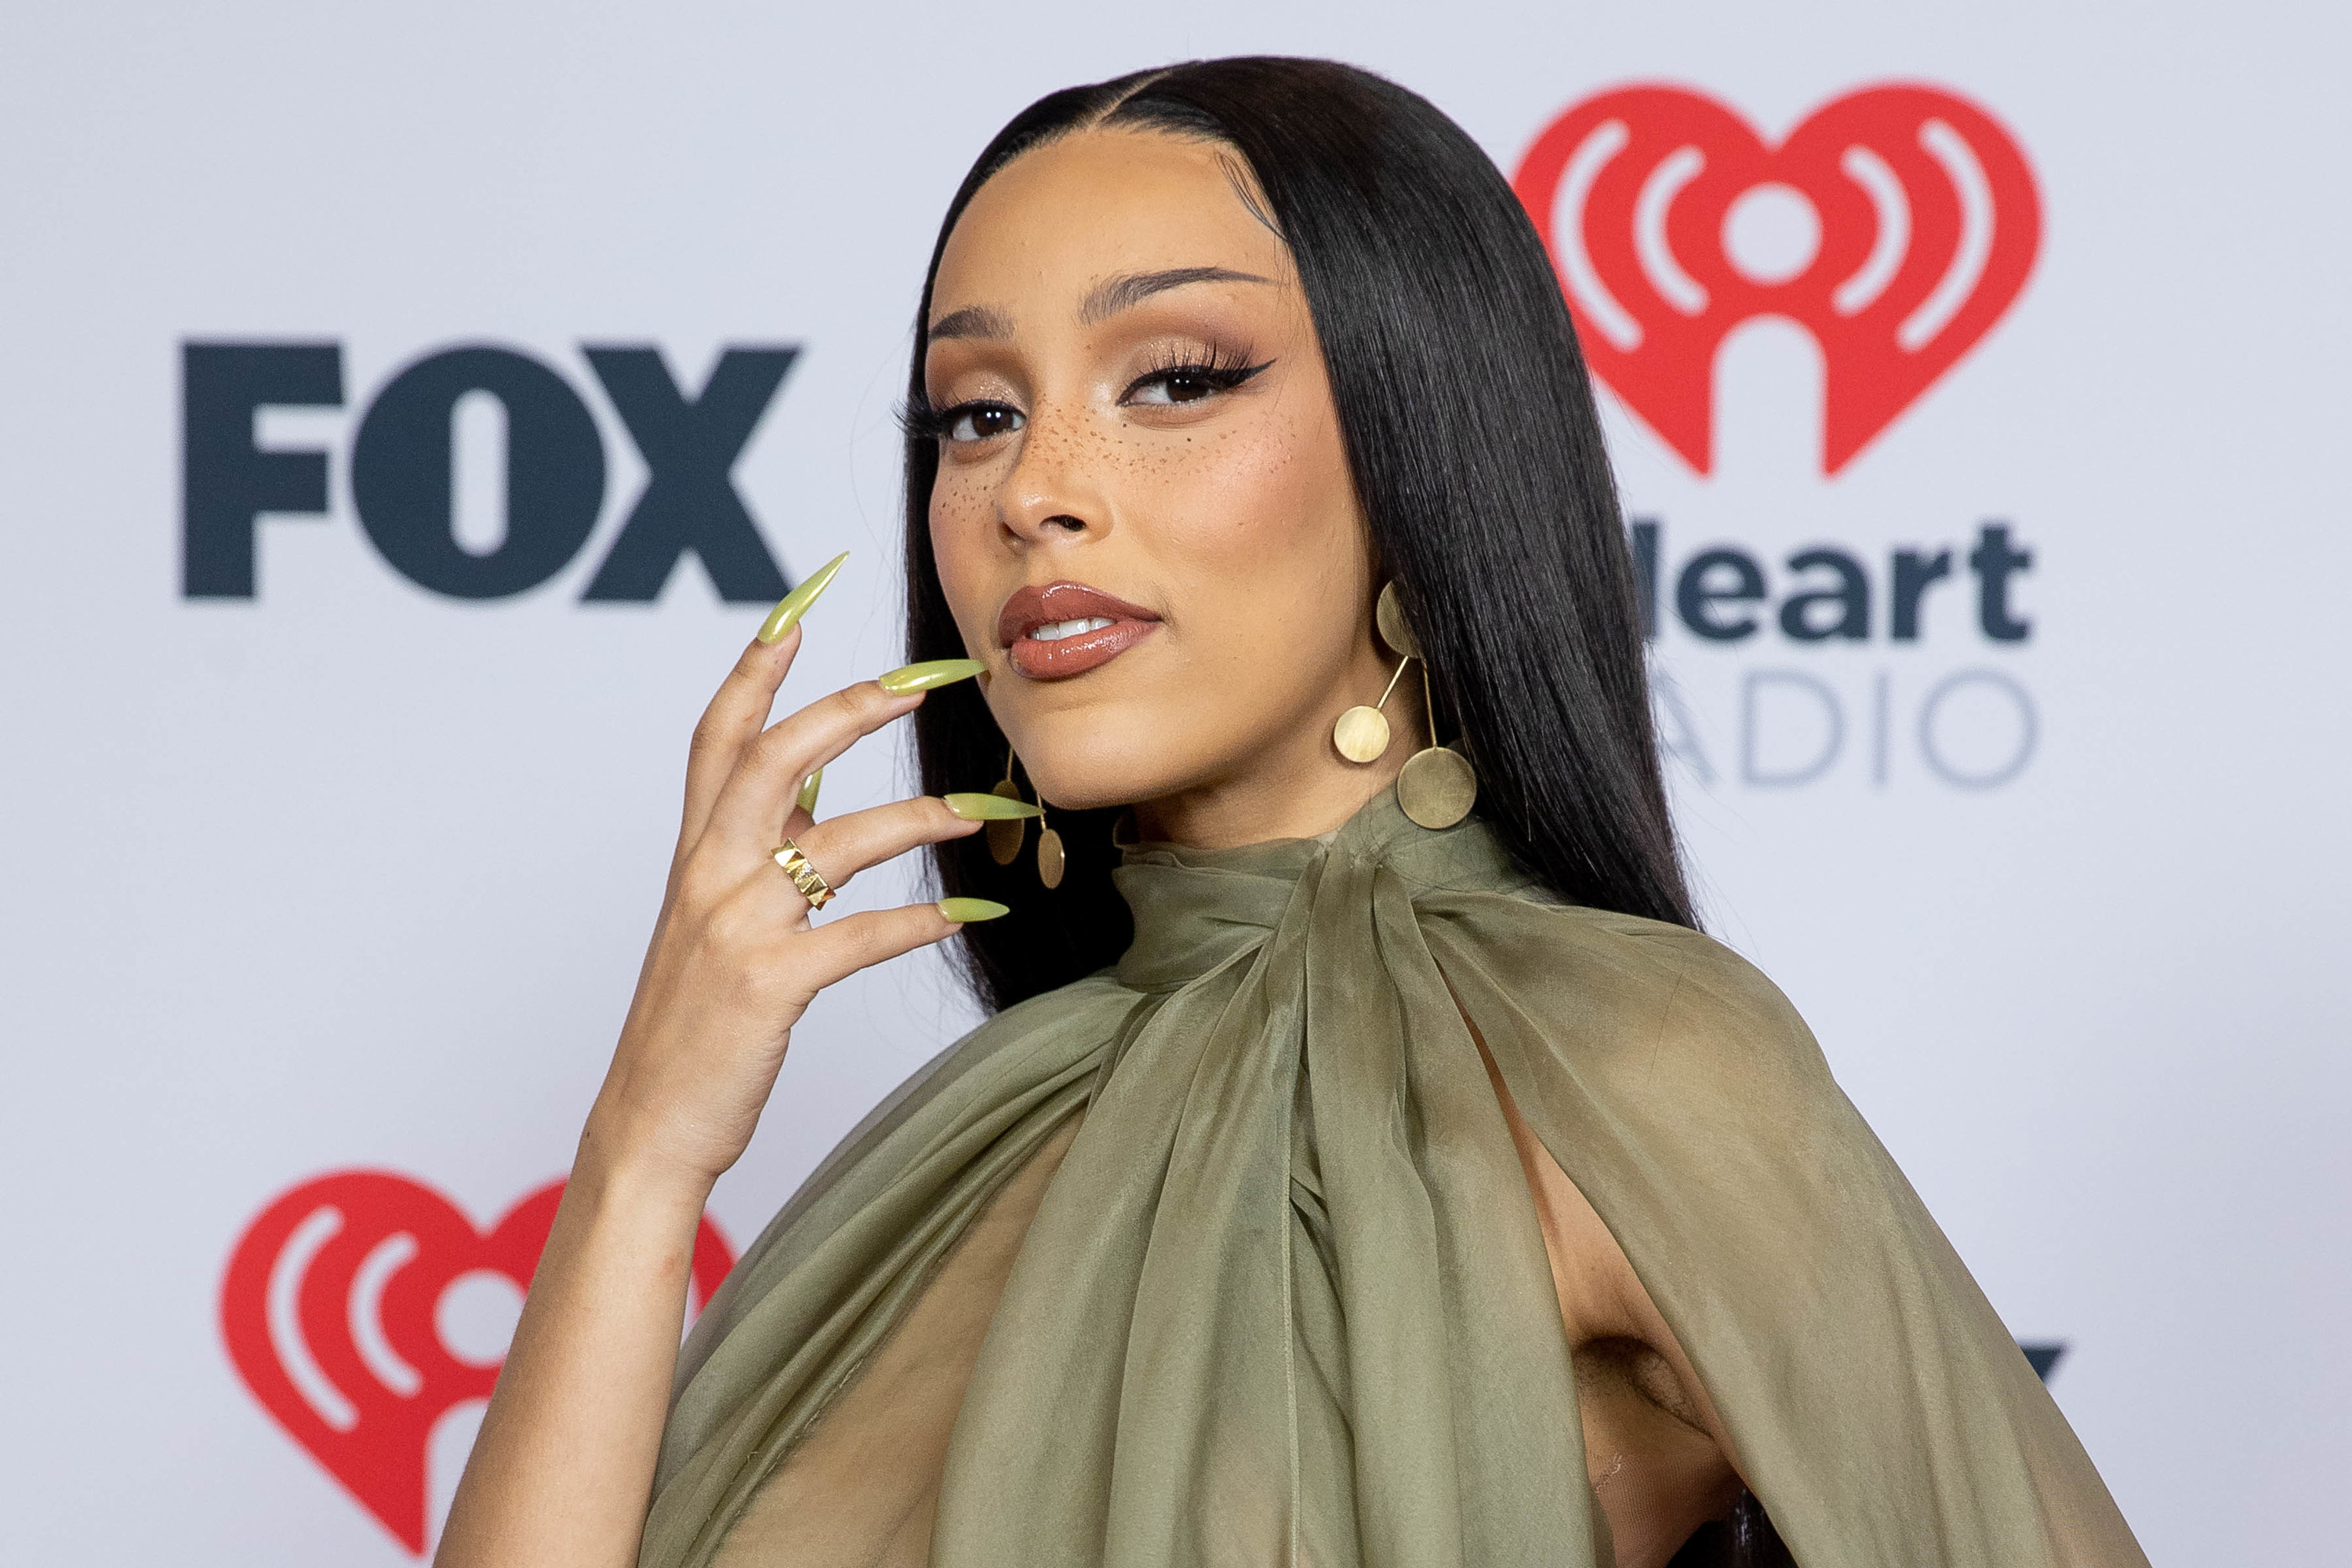 Doja Cat at the 2021 iHeartRadio Music Awards showing off her long nails